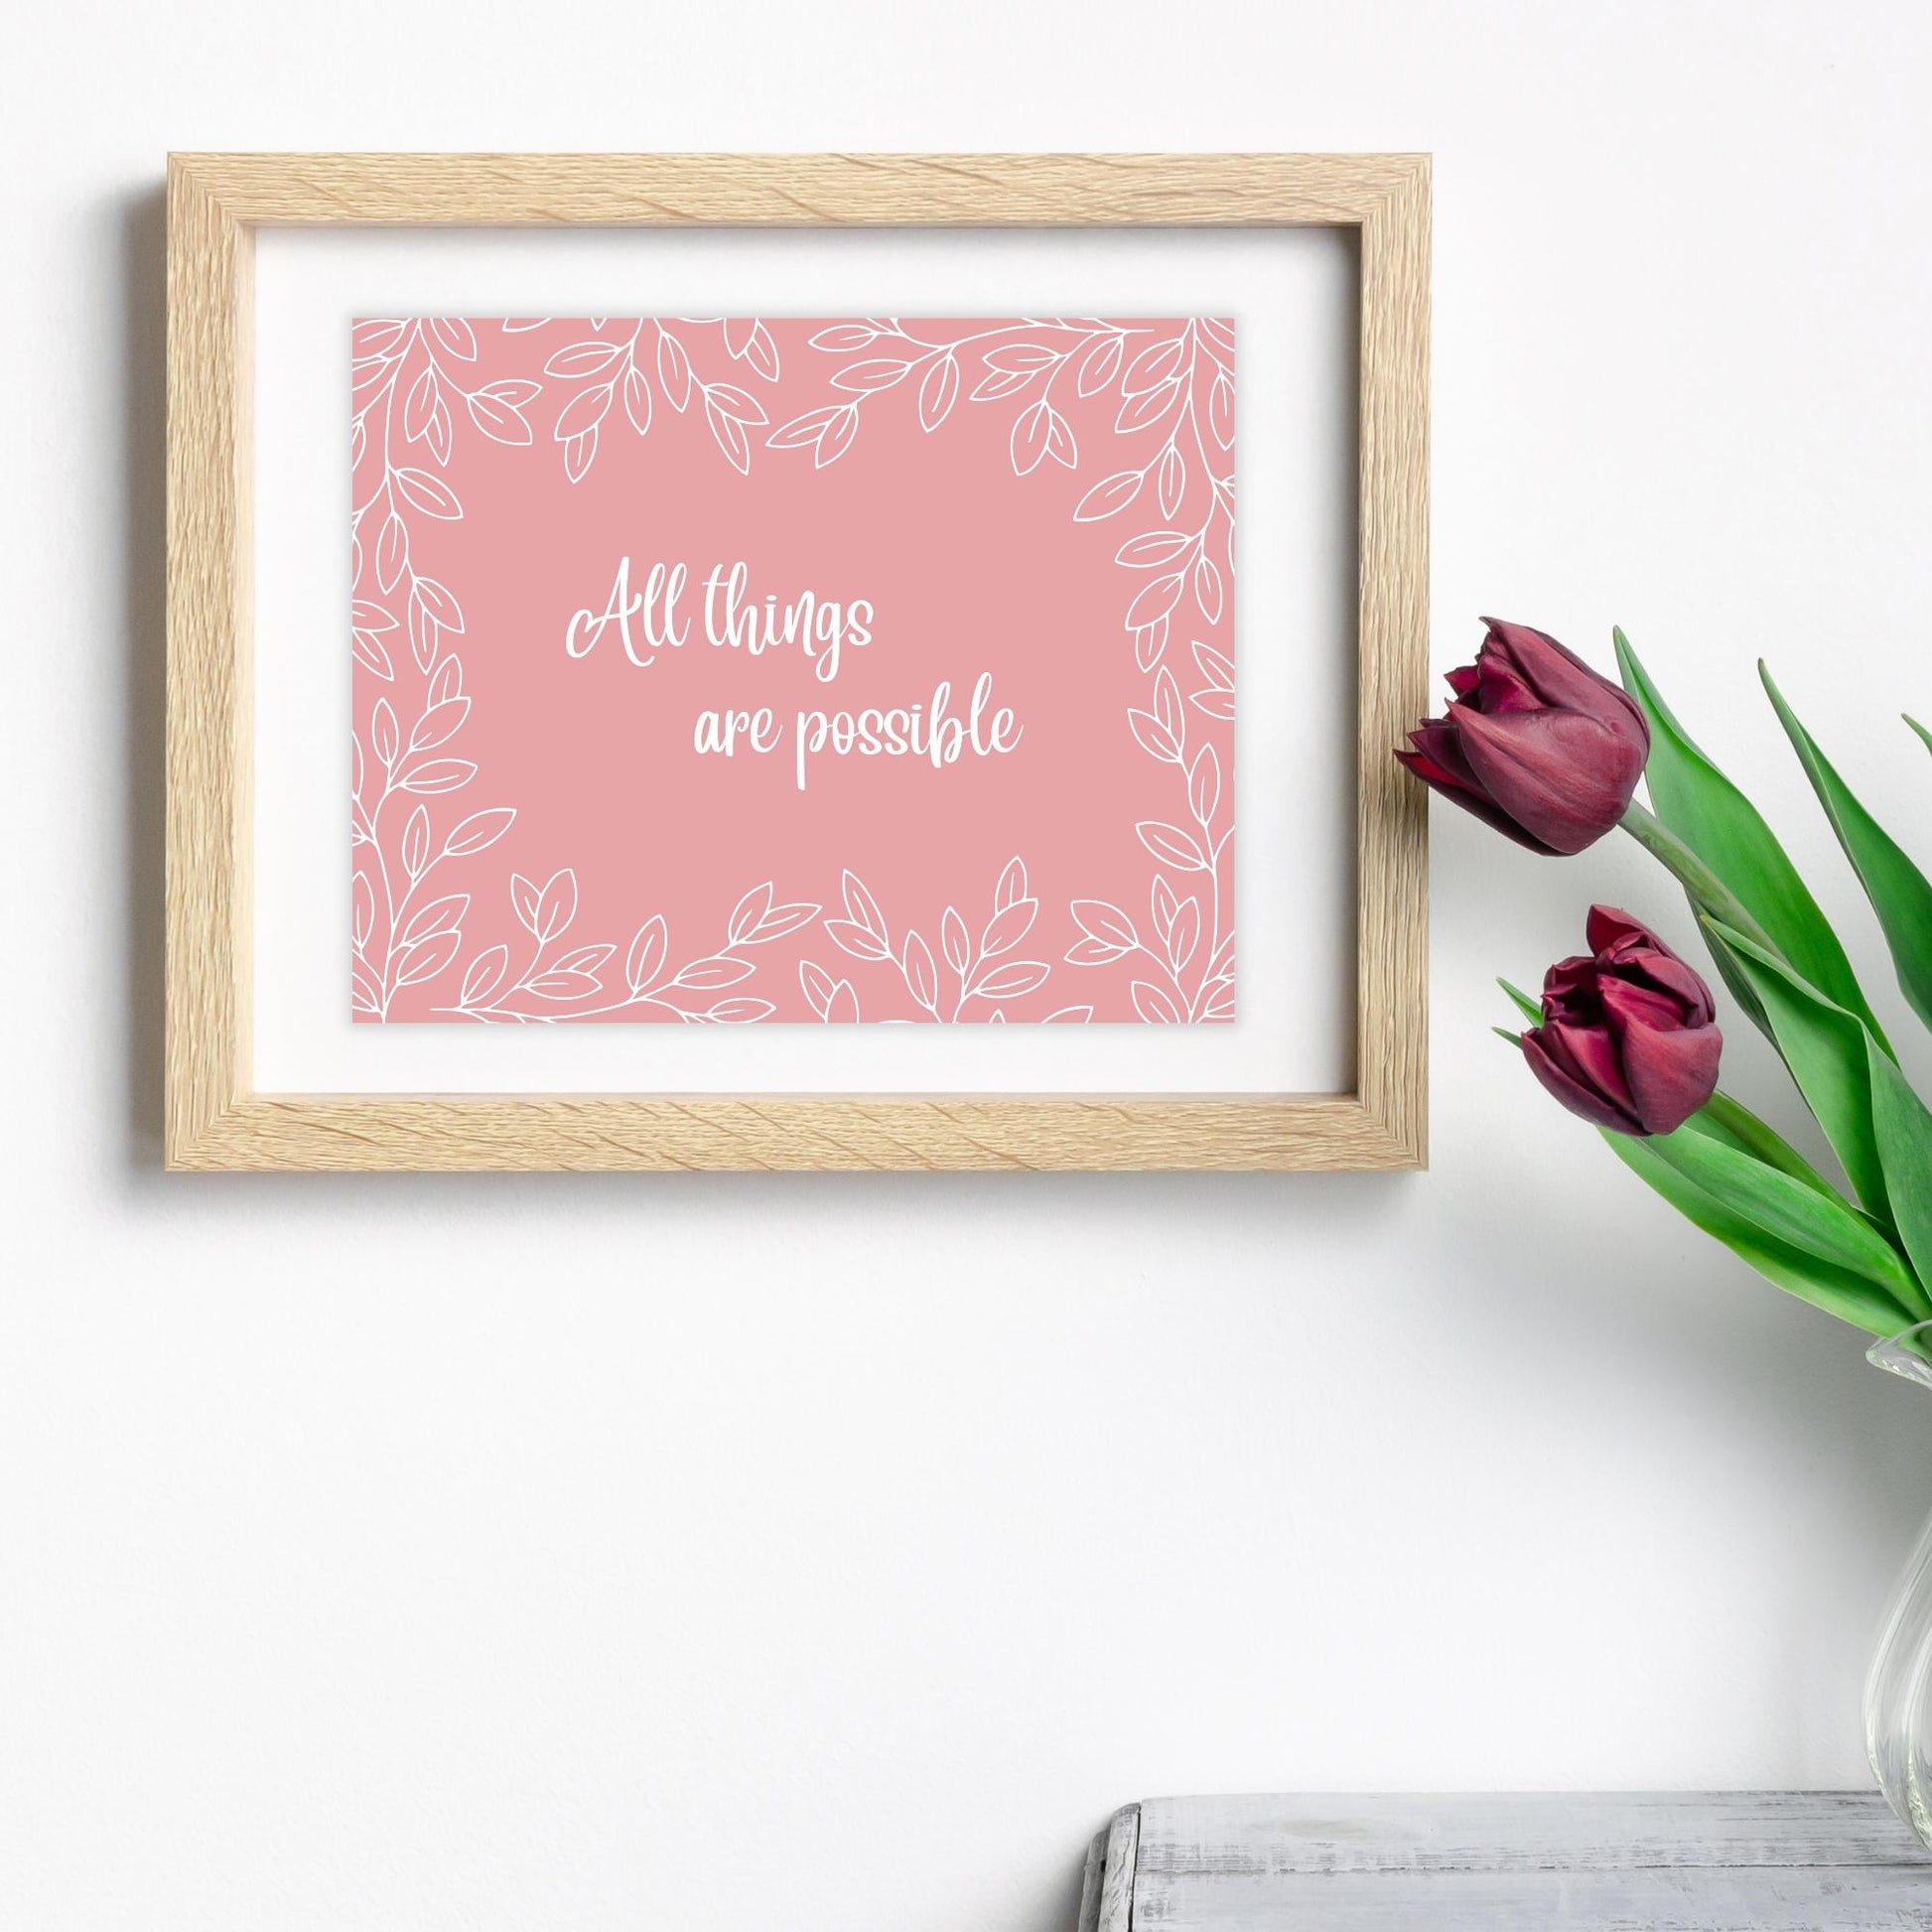 Inspirational Word Art - All things are possible - Leaf Design Wall Decor (10x8 print) choose from 5 colors | Pink shown framed in natural wood frame next to plum tulips | oak7west.com